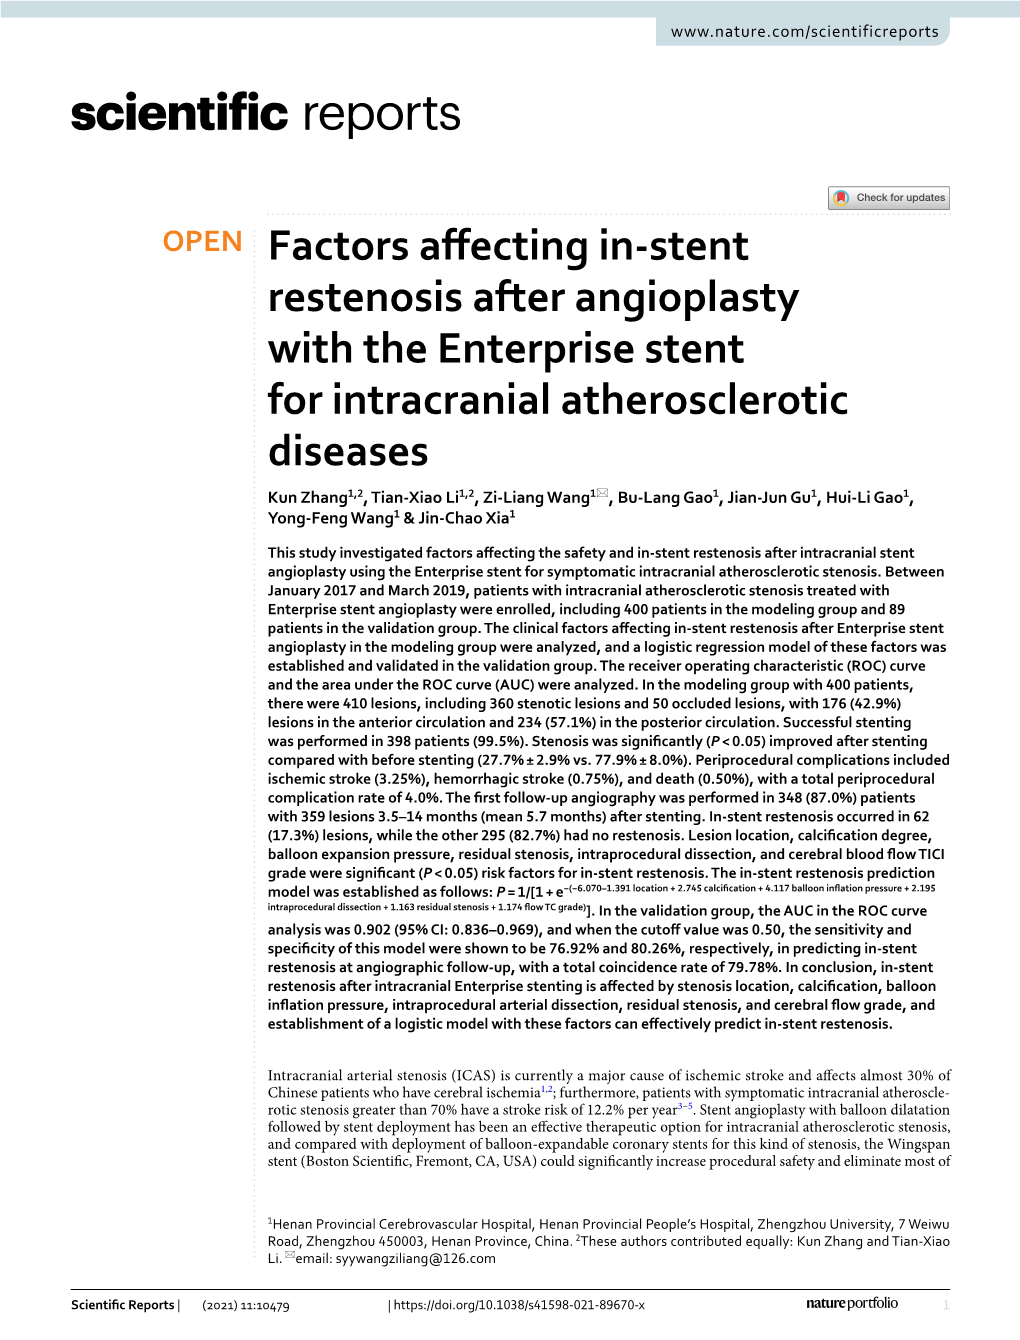 Factors Affecting In-Stent Restenosis After Angioplasty with the Enterprise